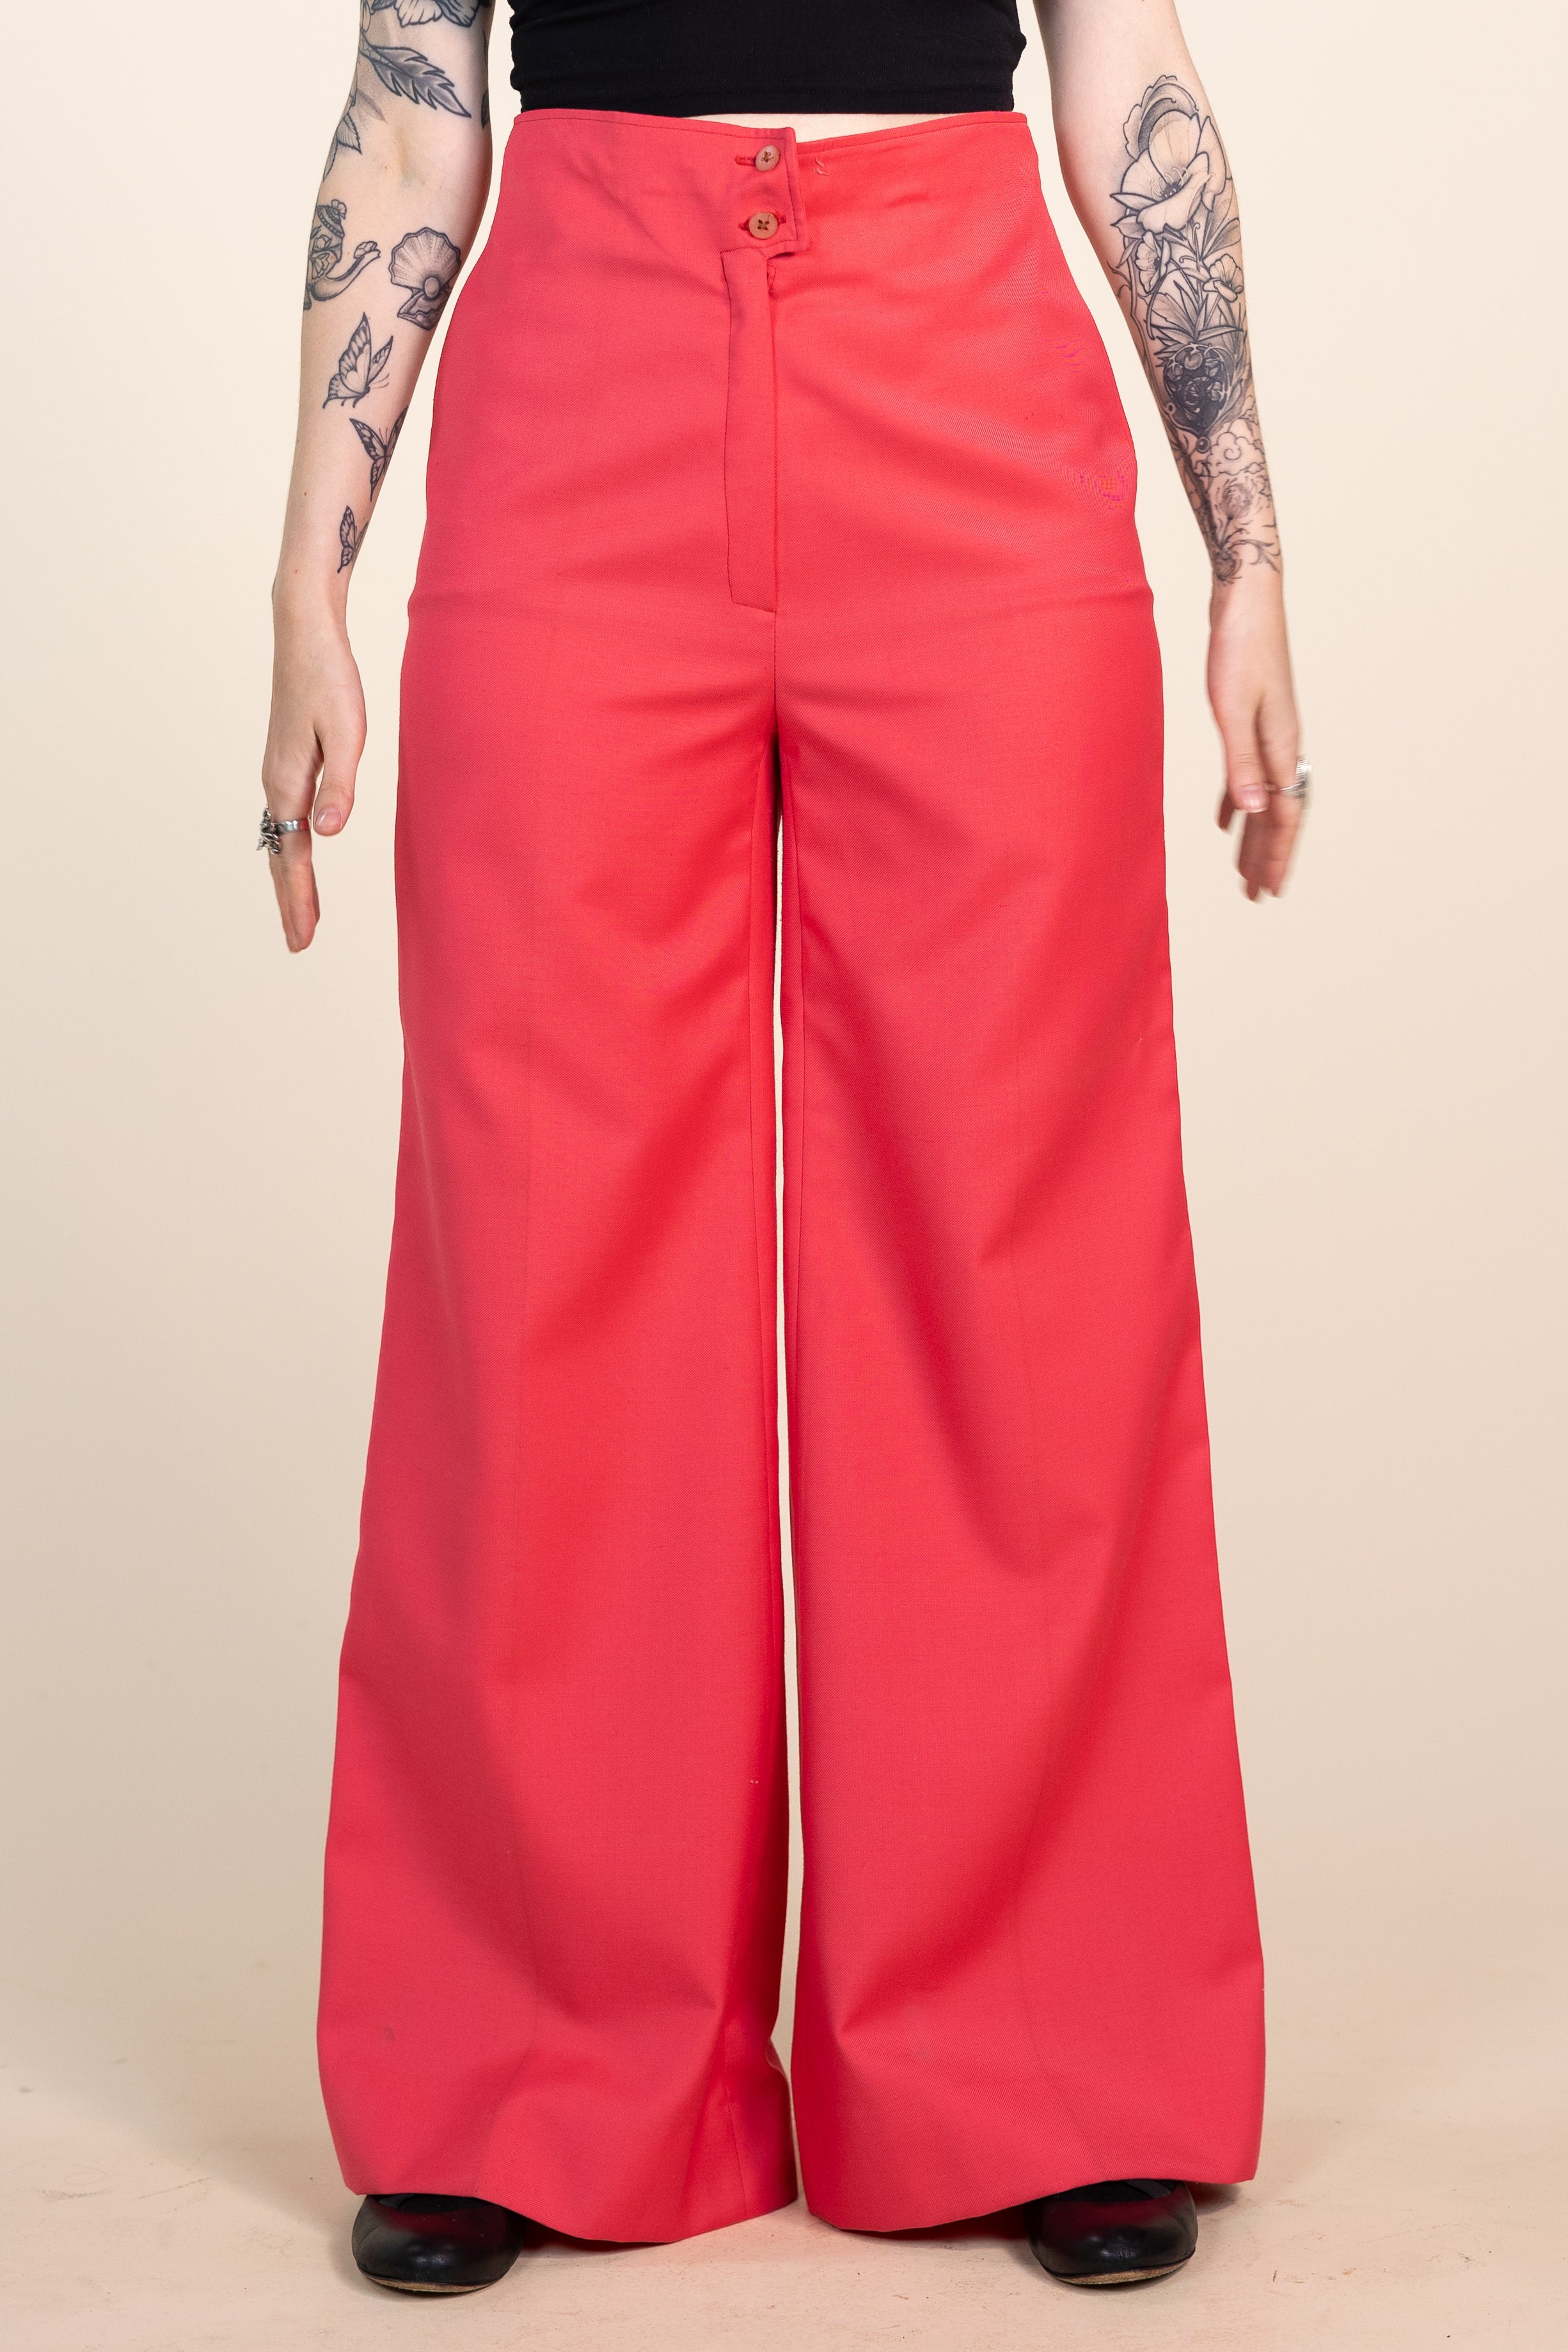 Handmade pink flared trousers